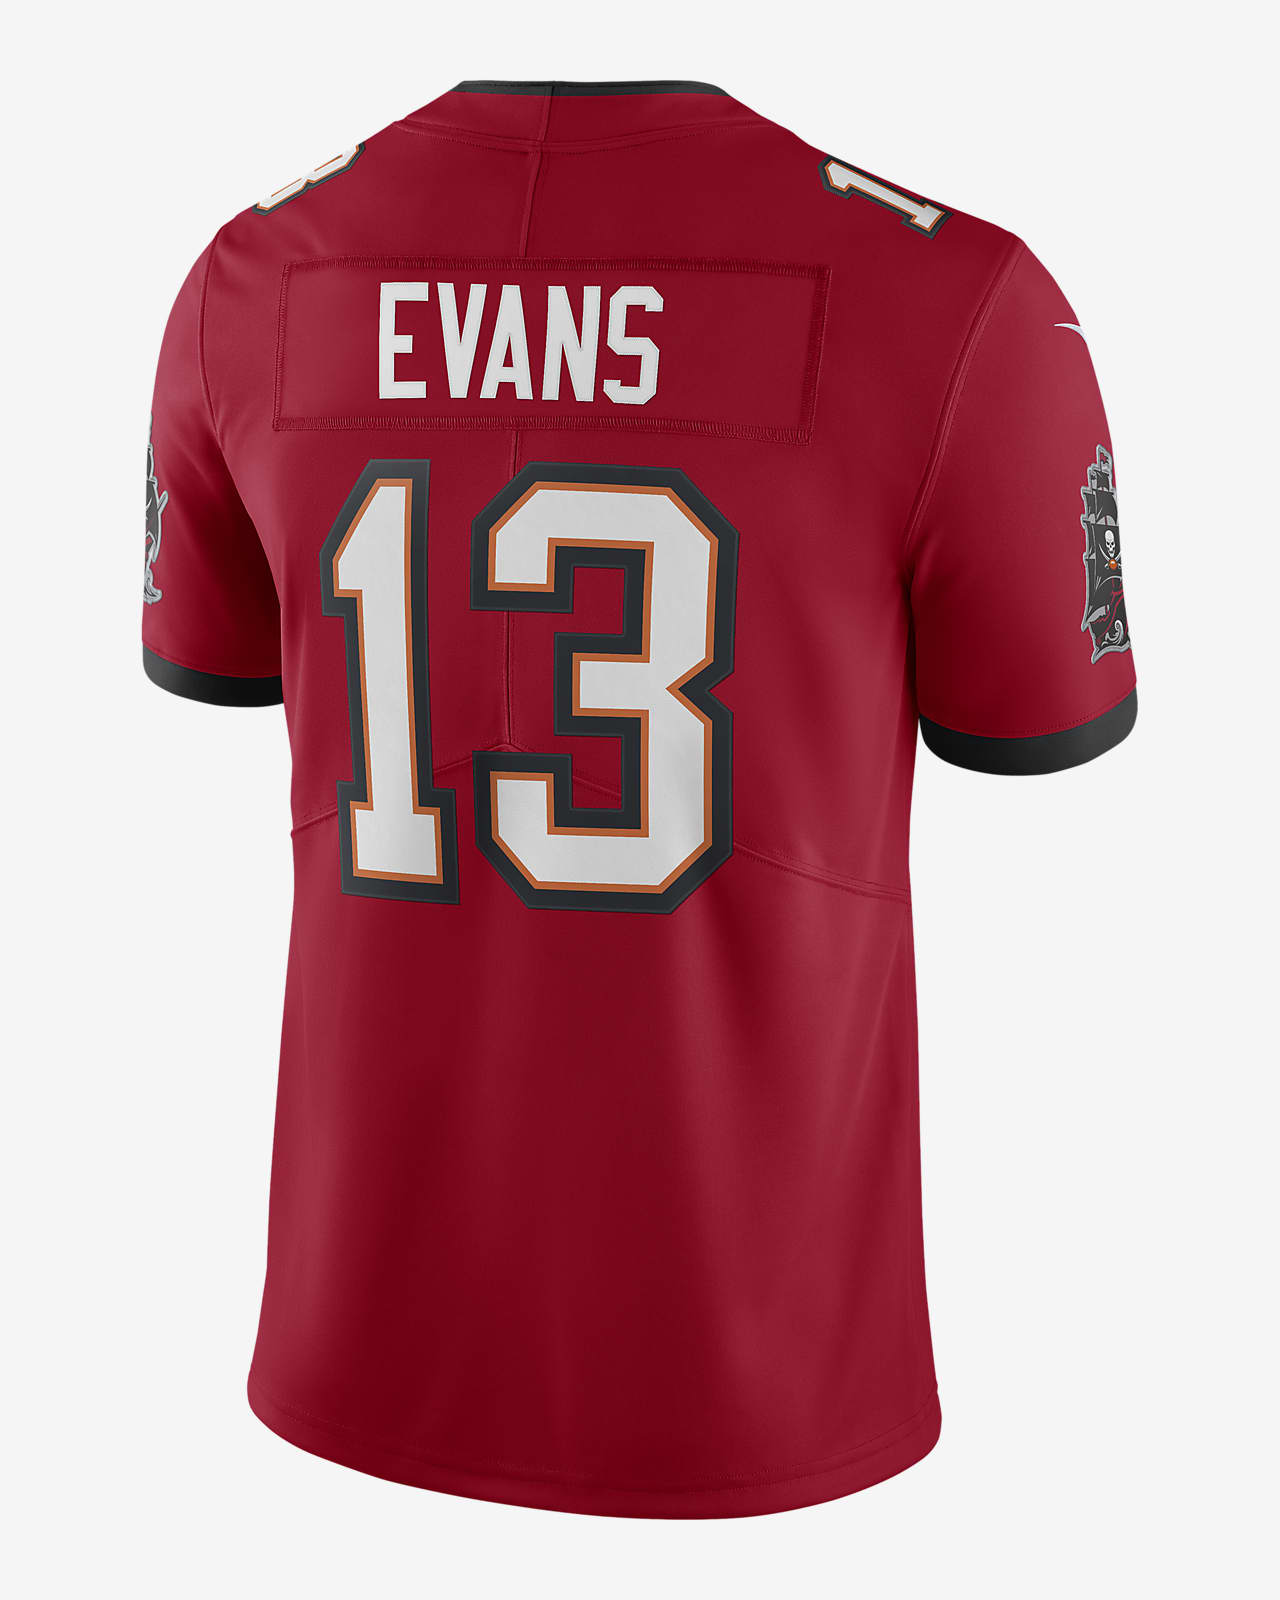 mike evans authentic jersey